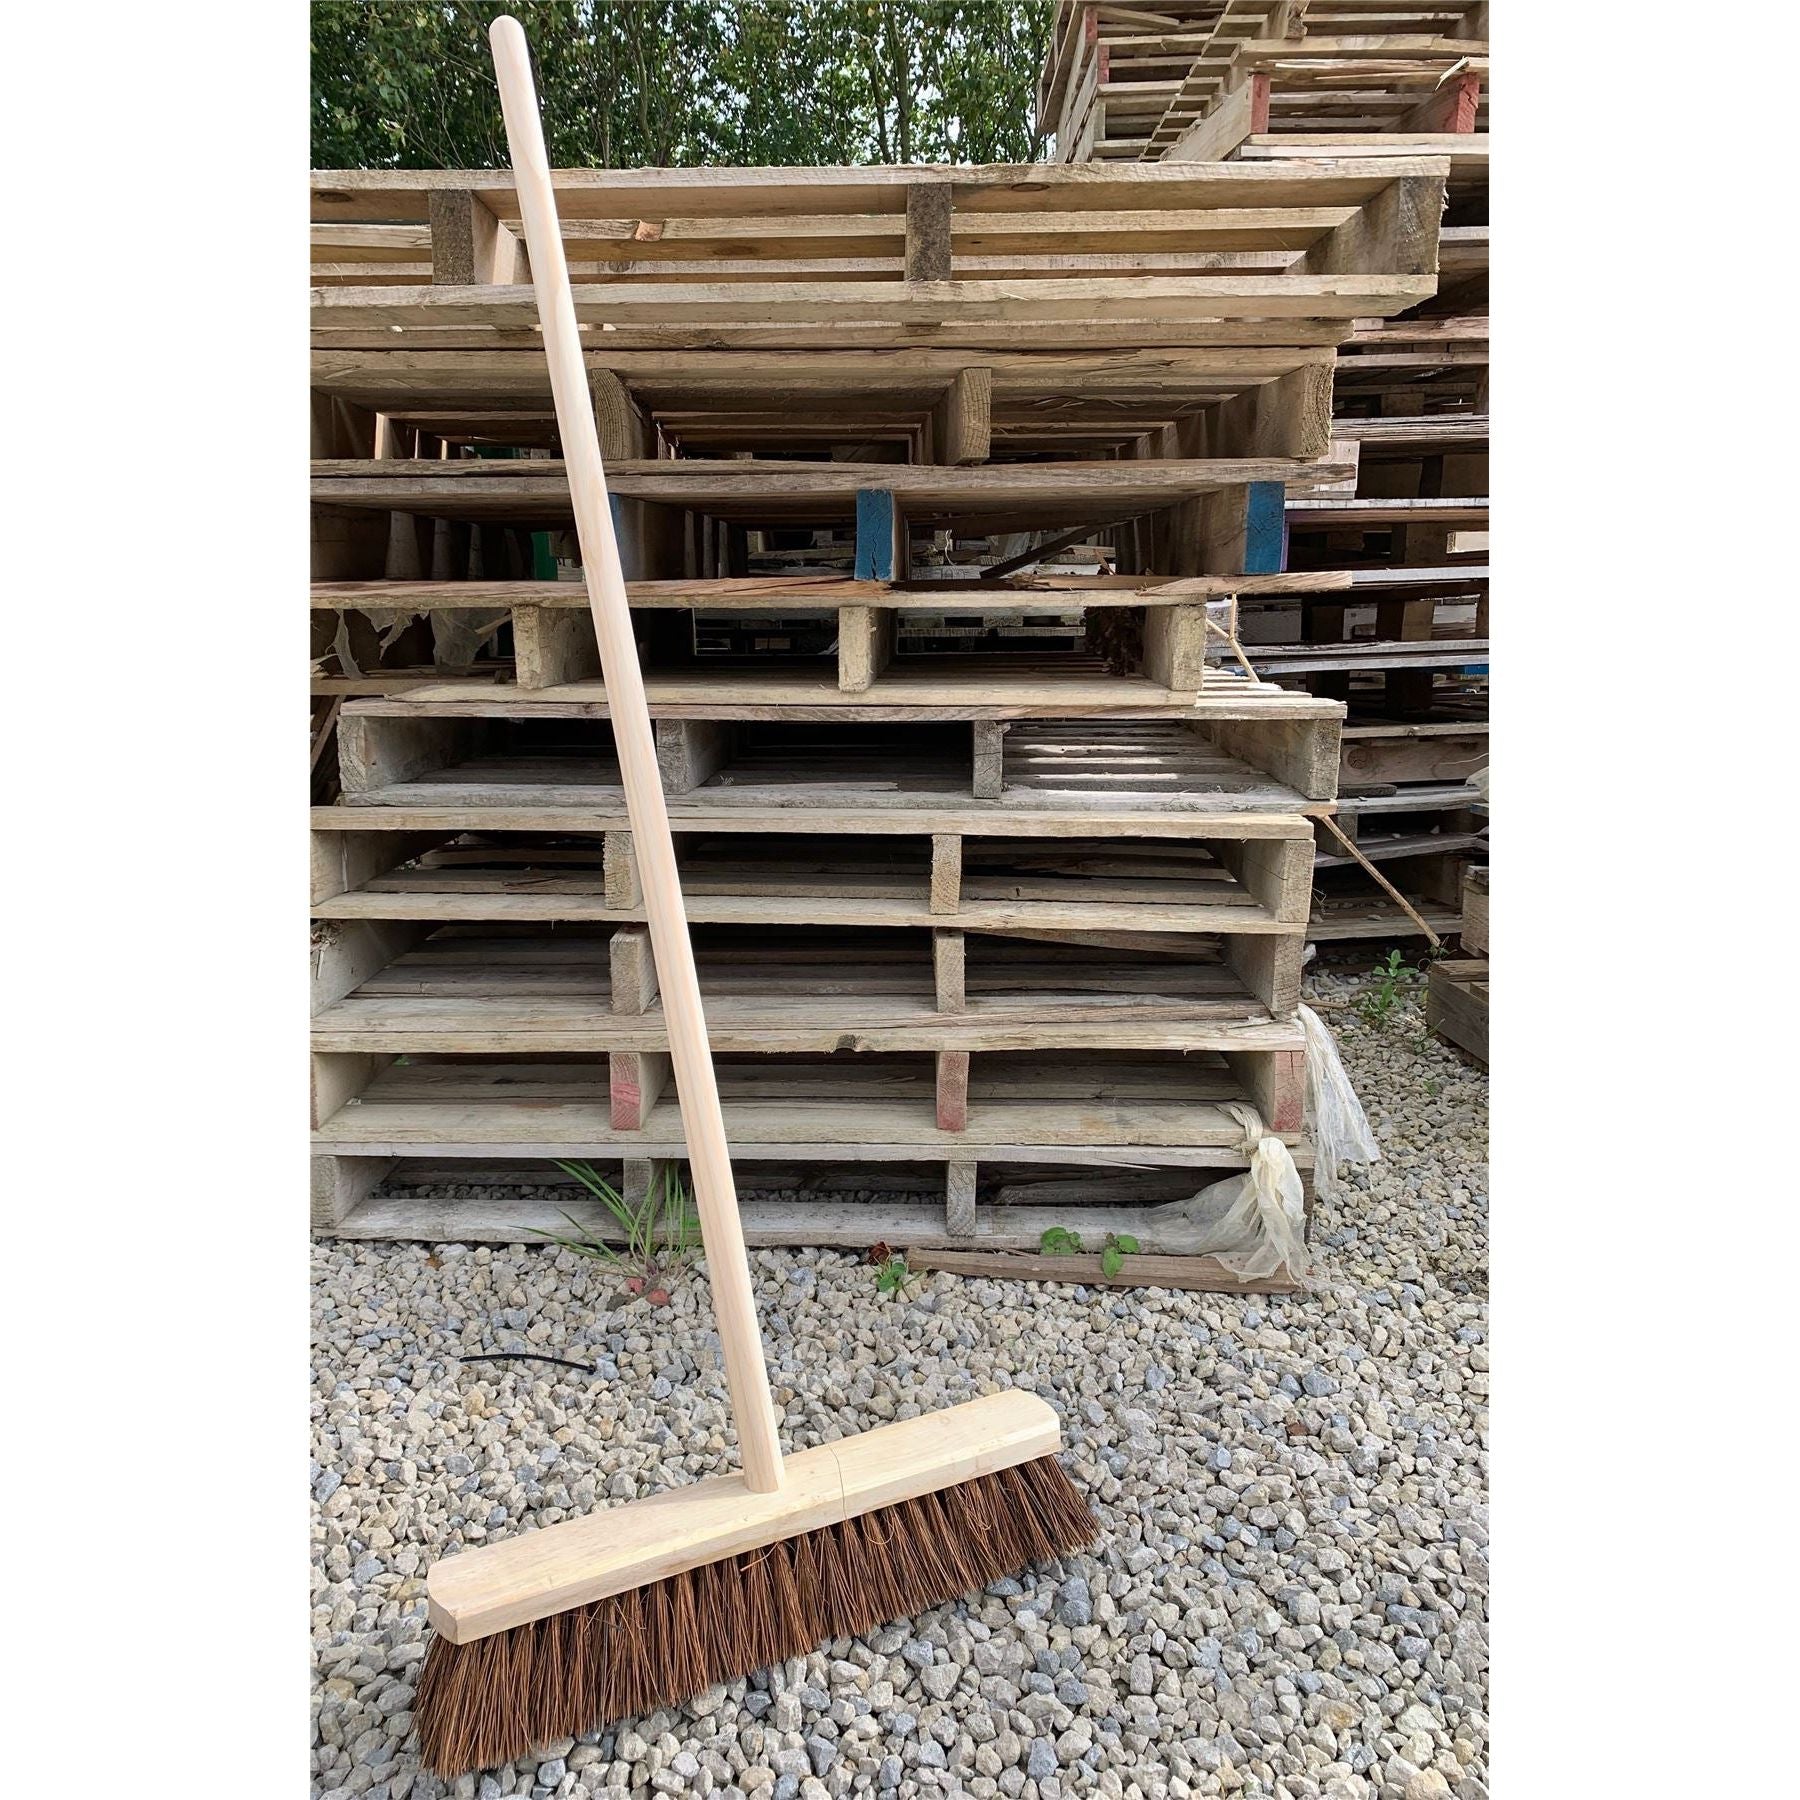 18" Stiff Natural Bassine Broom Head with Strong Wooden Brush Handle